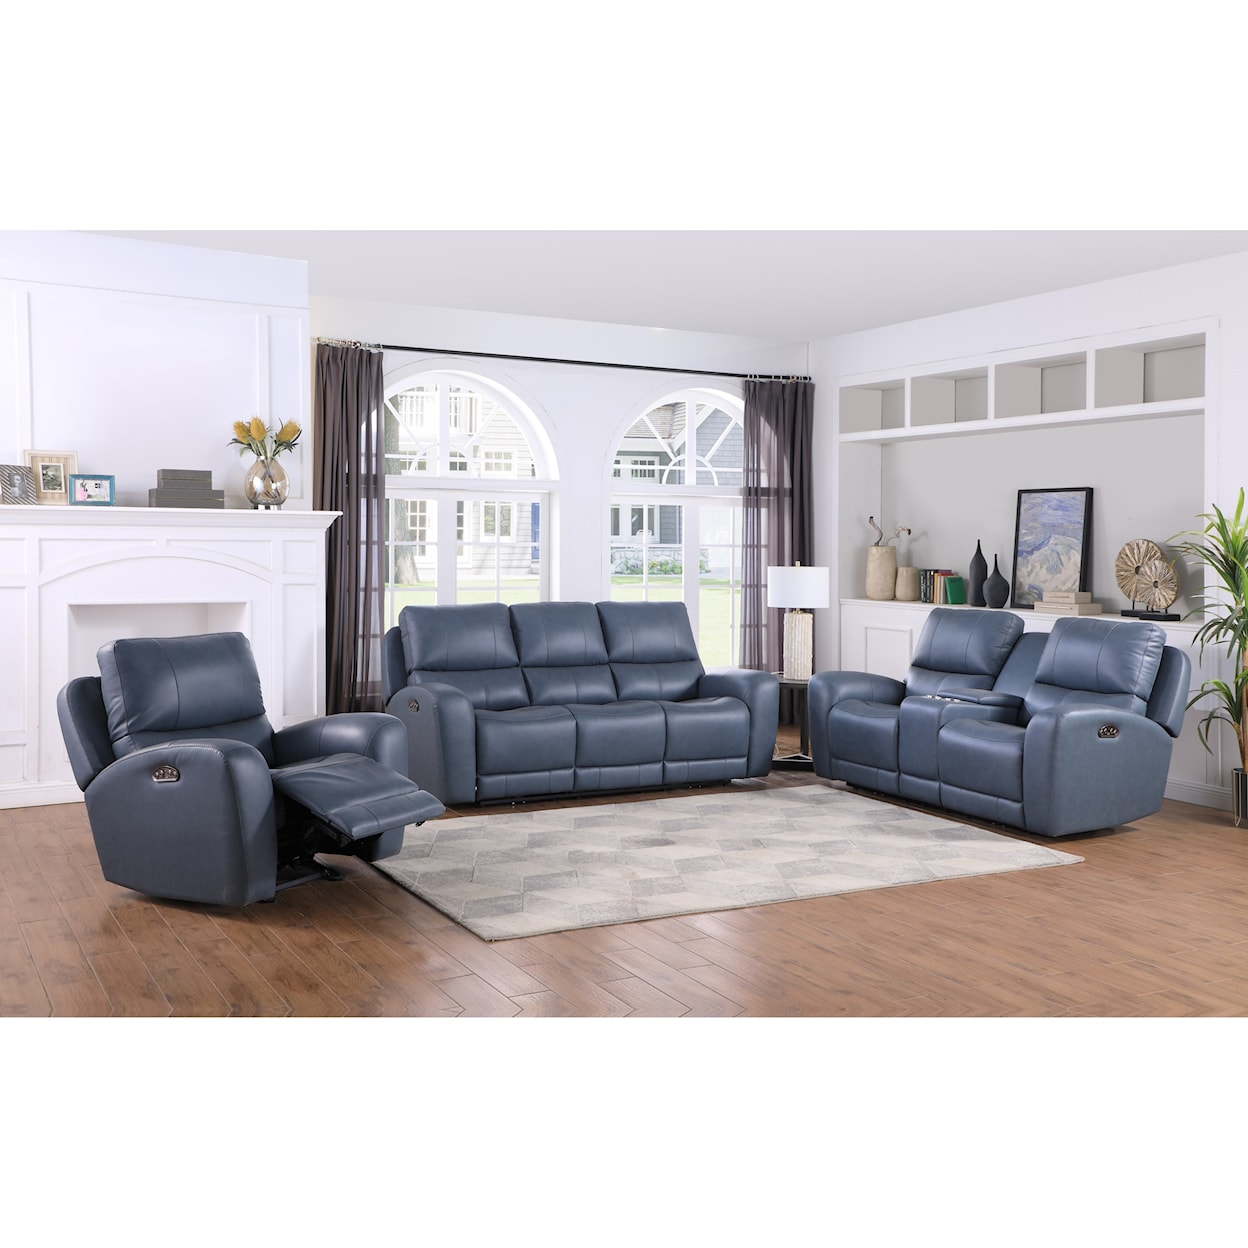 Leather Italia USA Belair Reclining Living Room Group